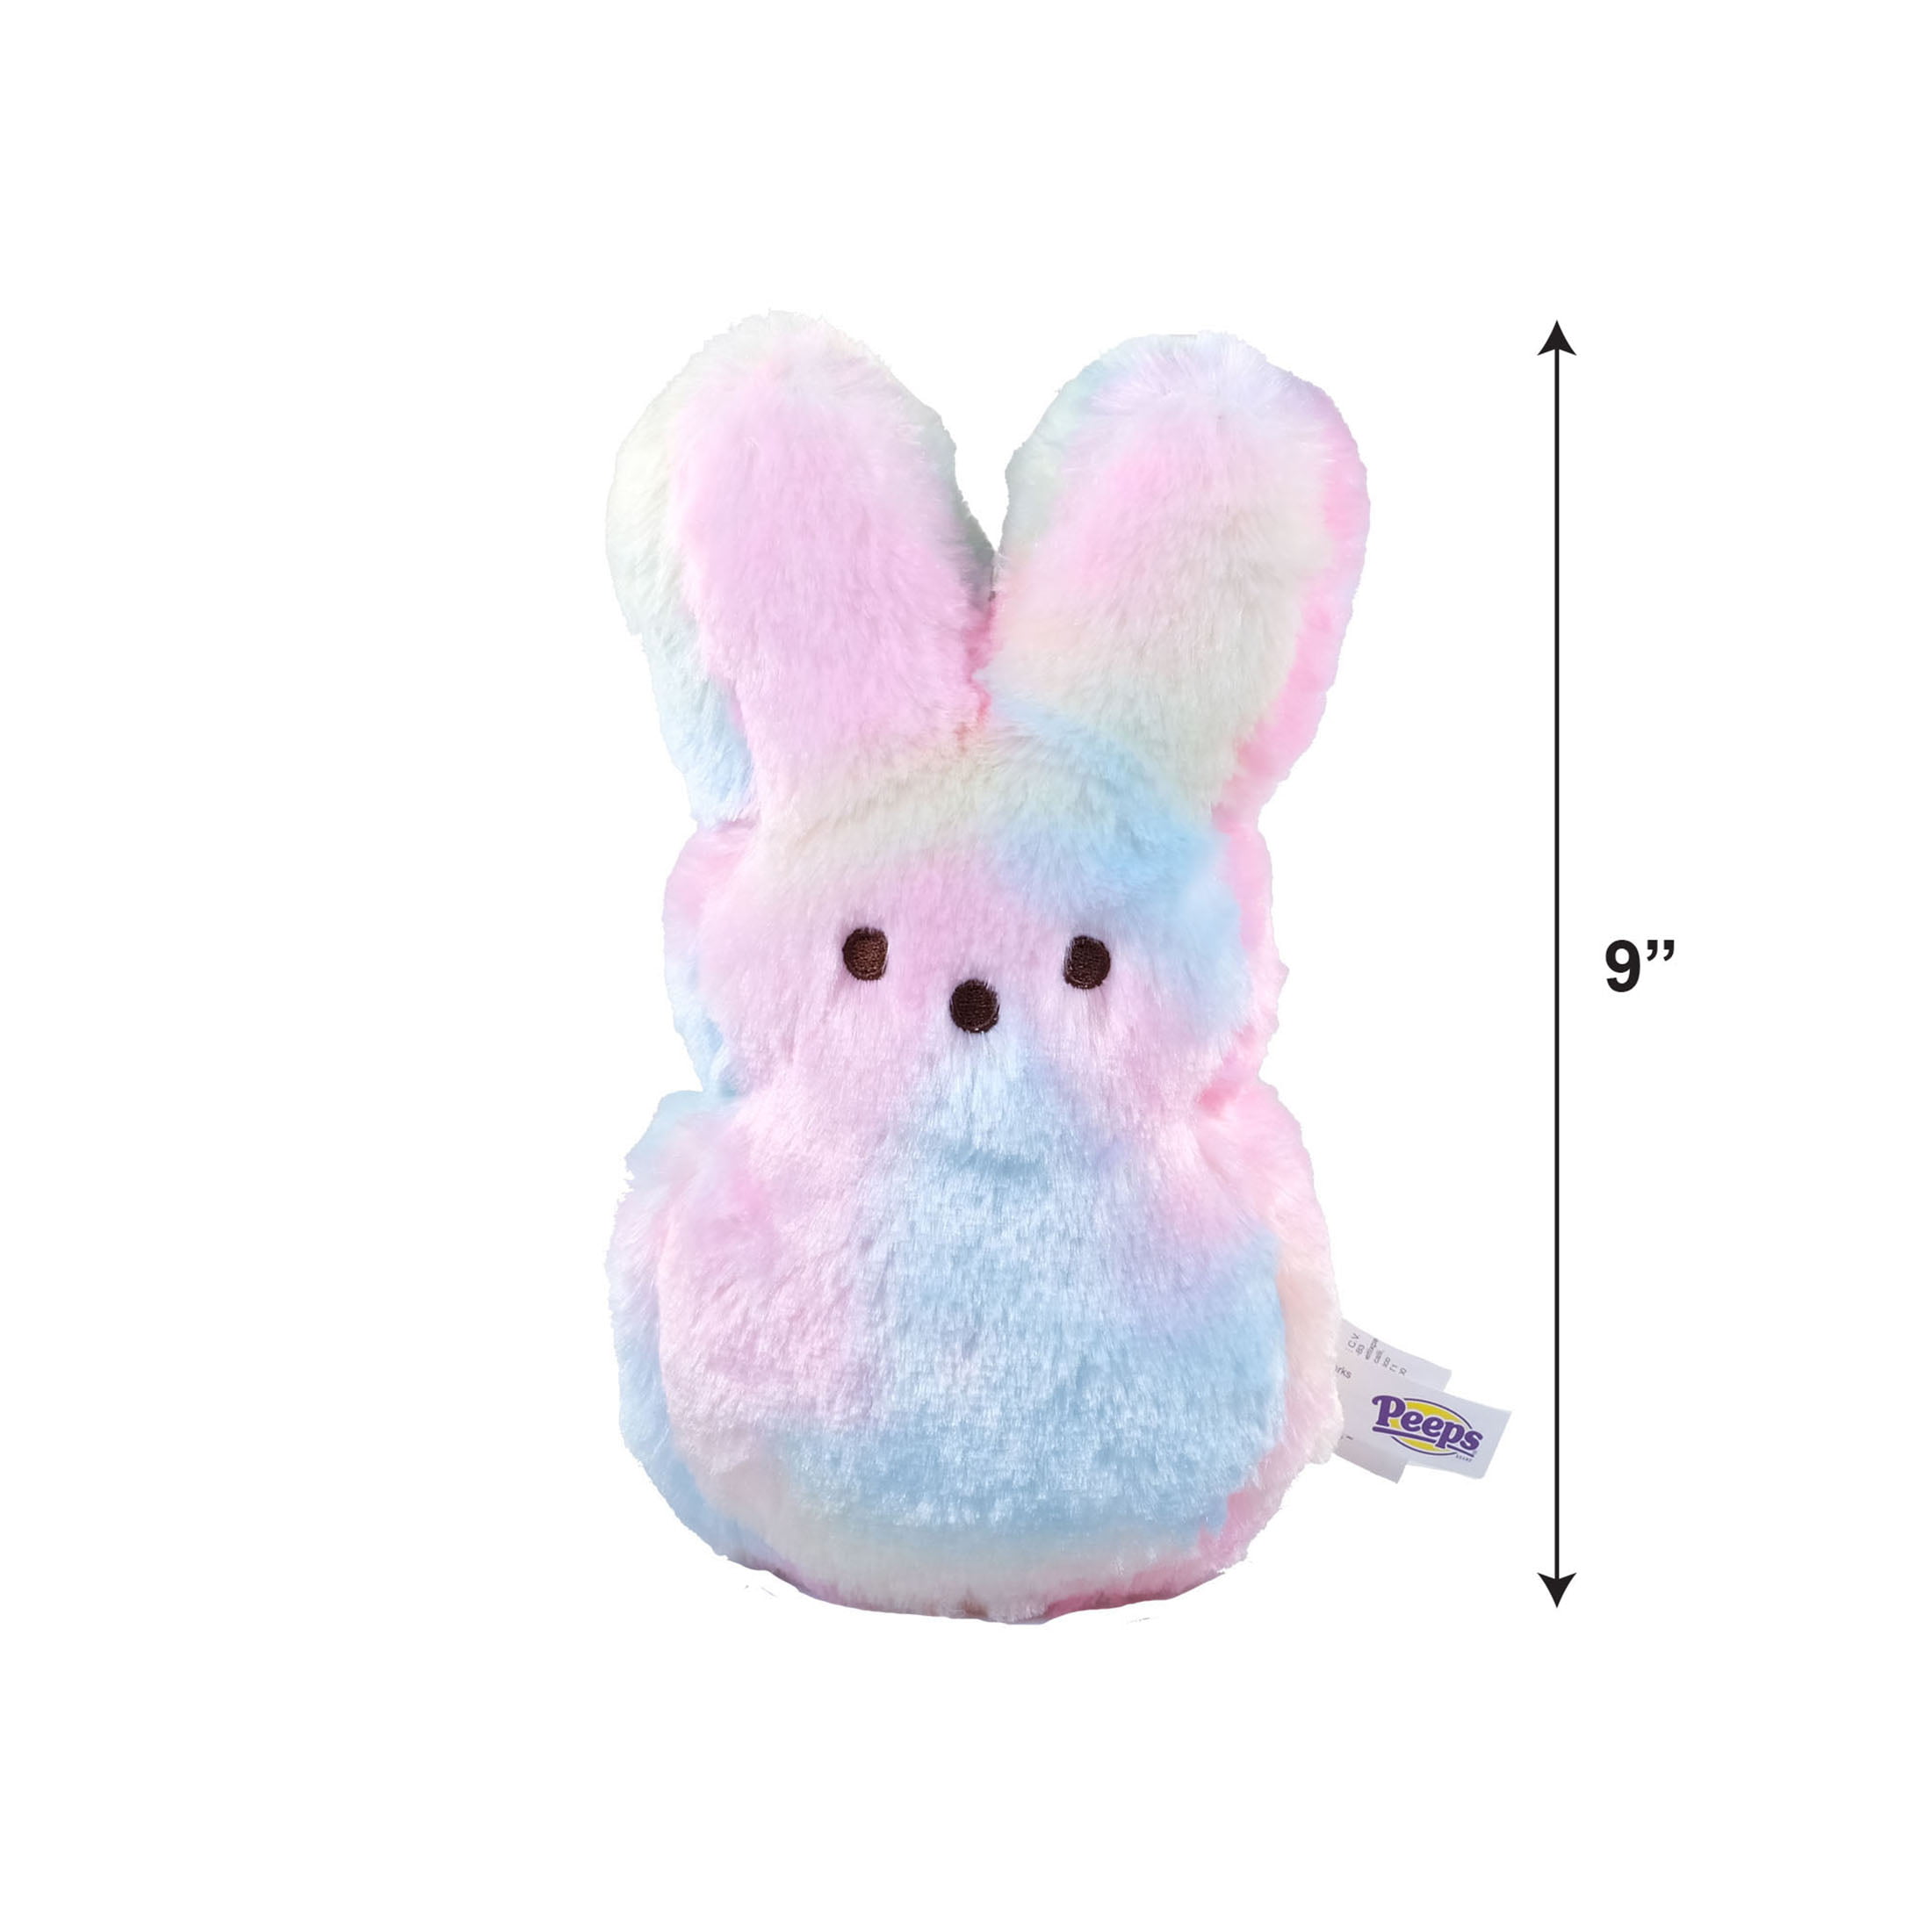 1x Peeps Blue Plush Bunny With Pastel Colored Stripes Sides 9" Stuffed Animal for sale online 